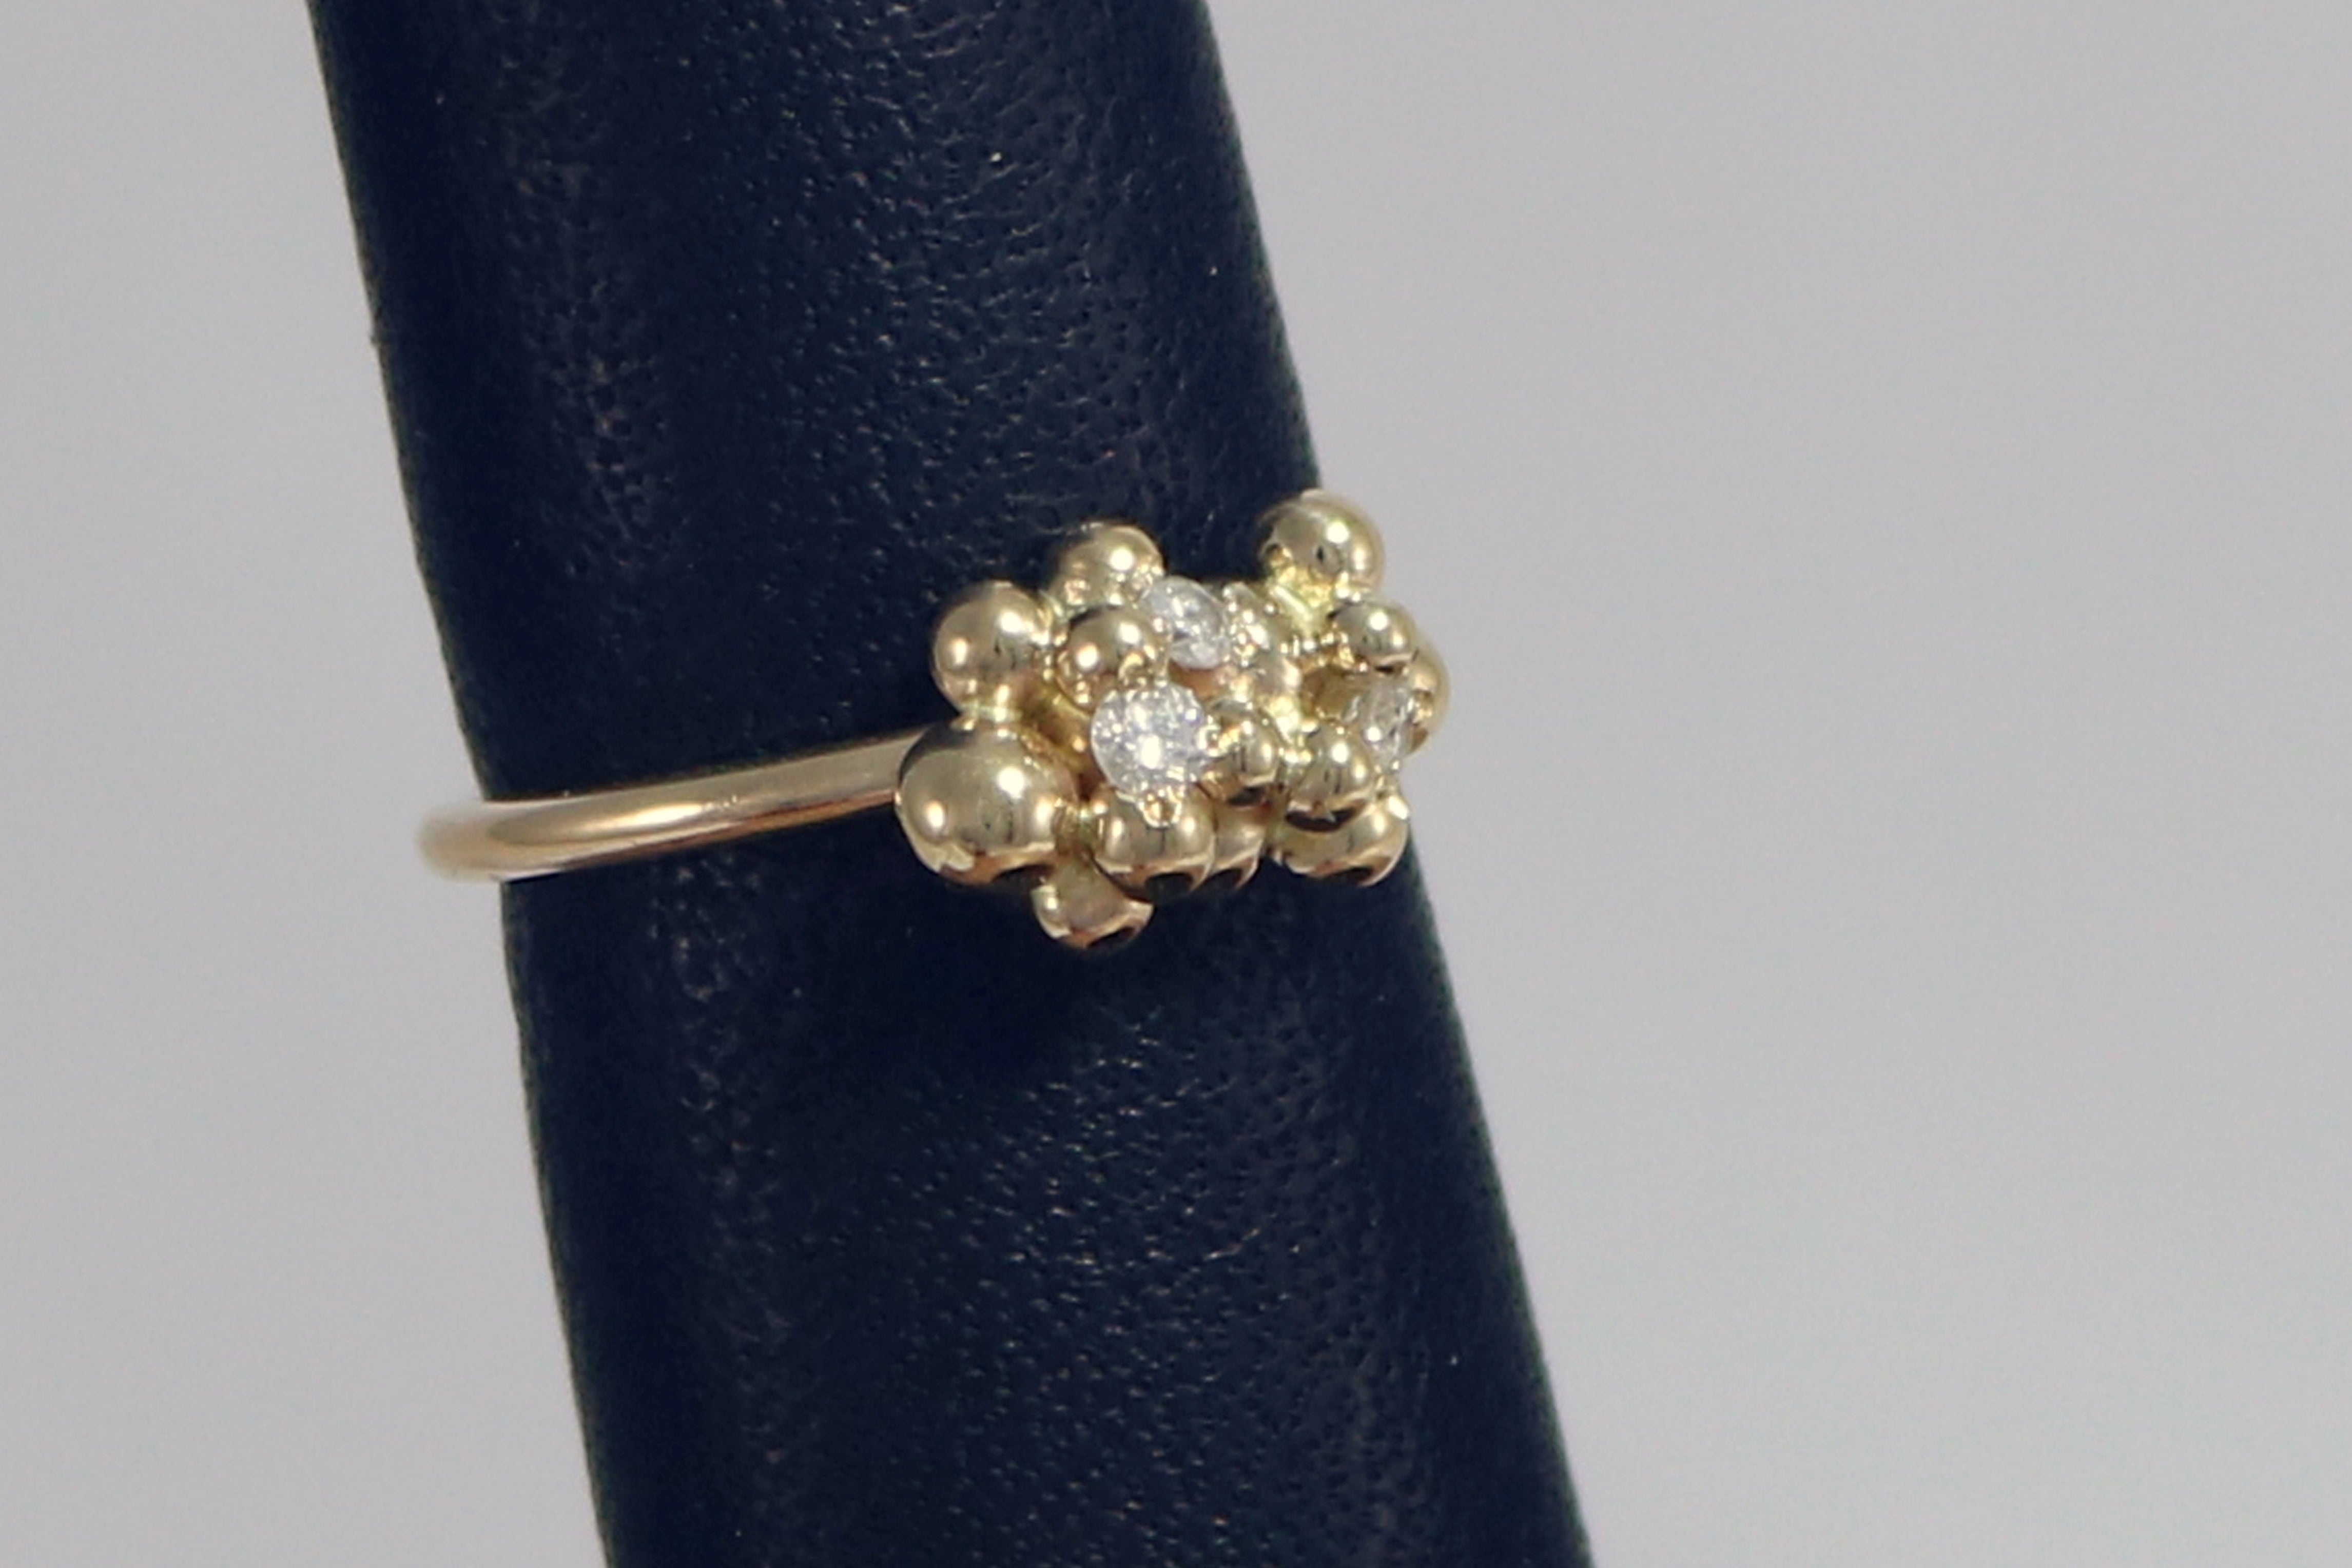 Captivating Cluster Diamond Rings | 14K Yellow Gold | Fine Jewelry | Design House Square/Yellow Gold